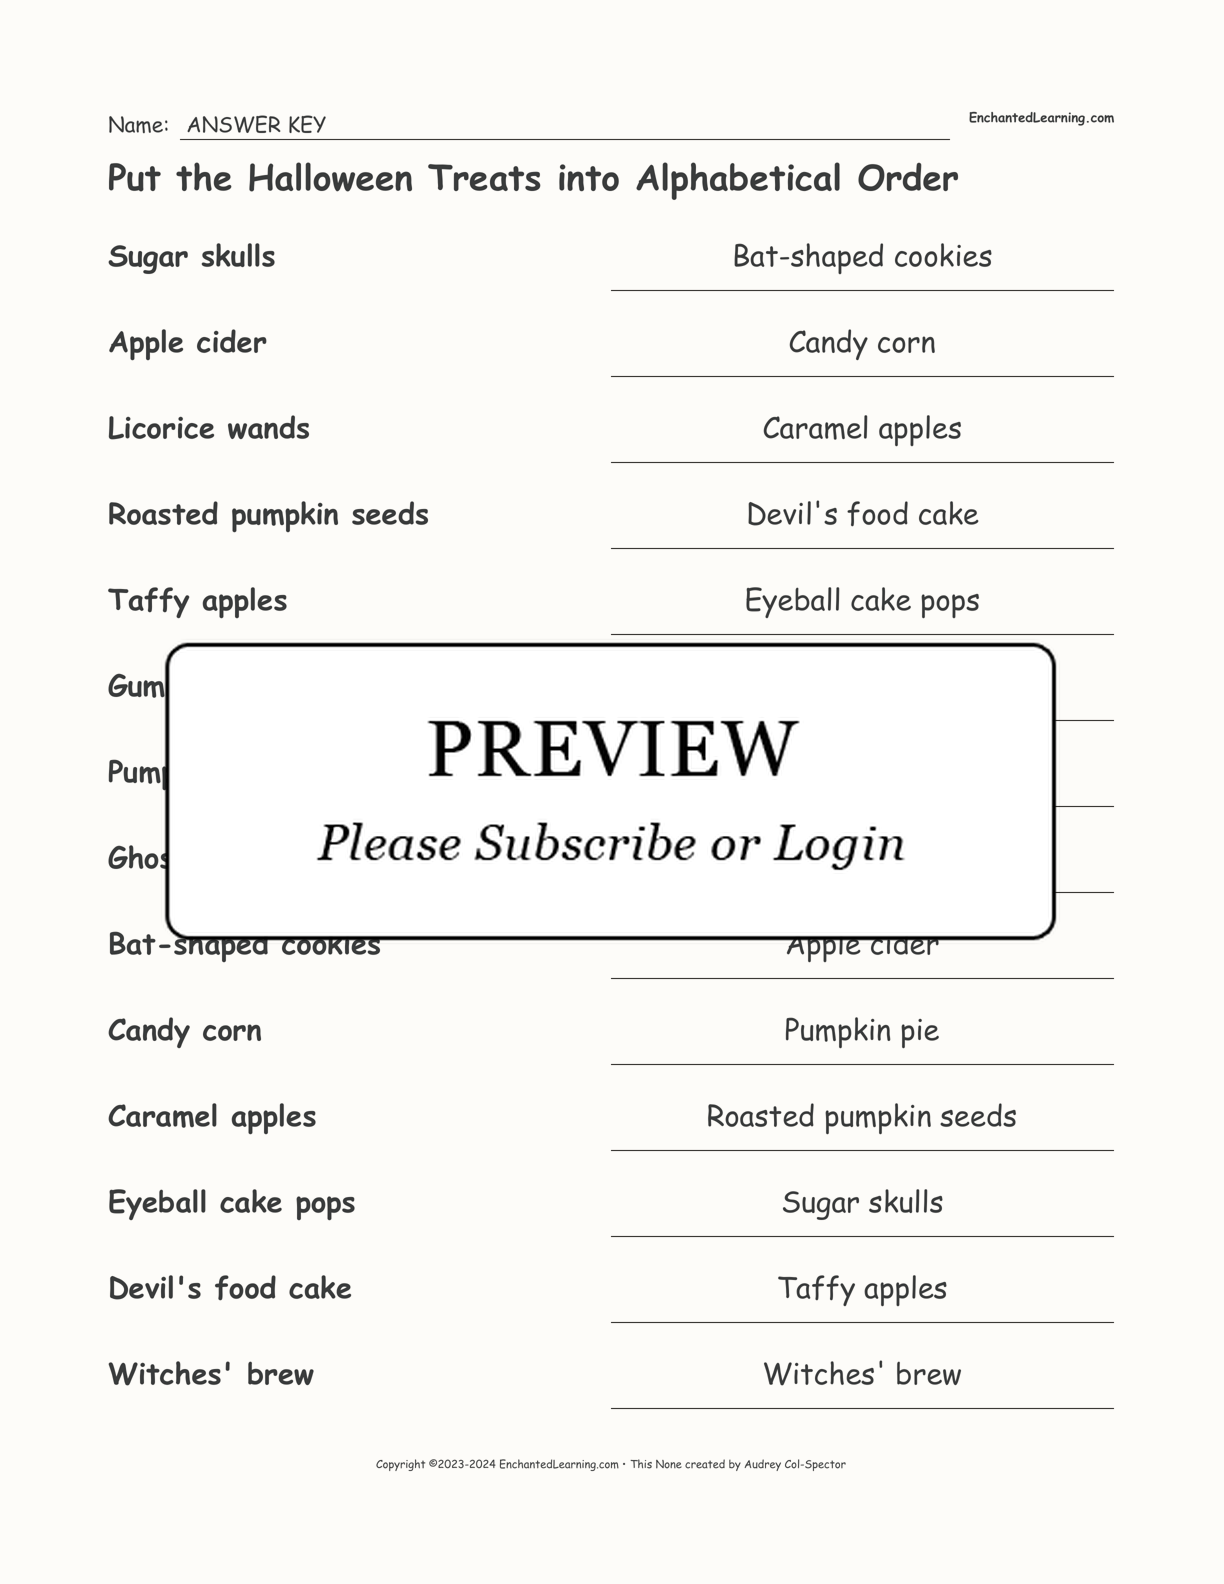 Put the Halloween Treats into Alphabetical Order interactive worksheet page 2